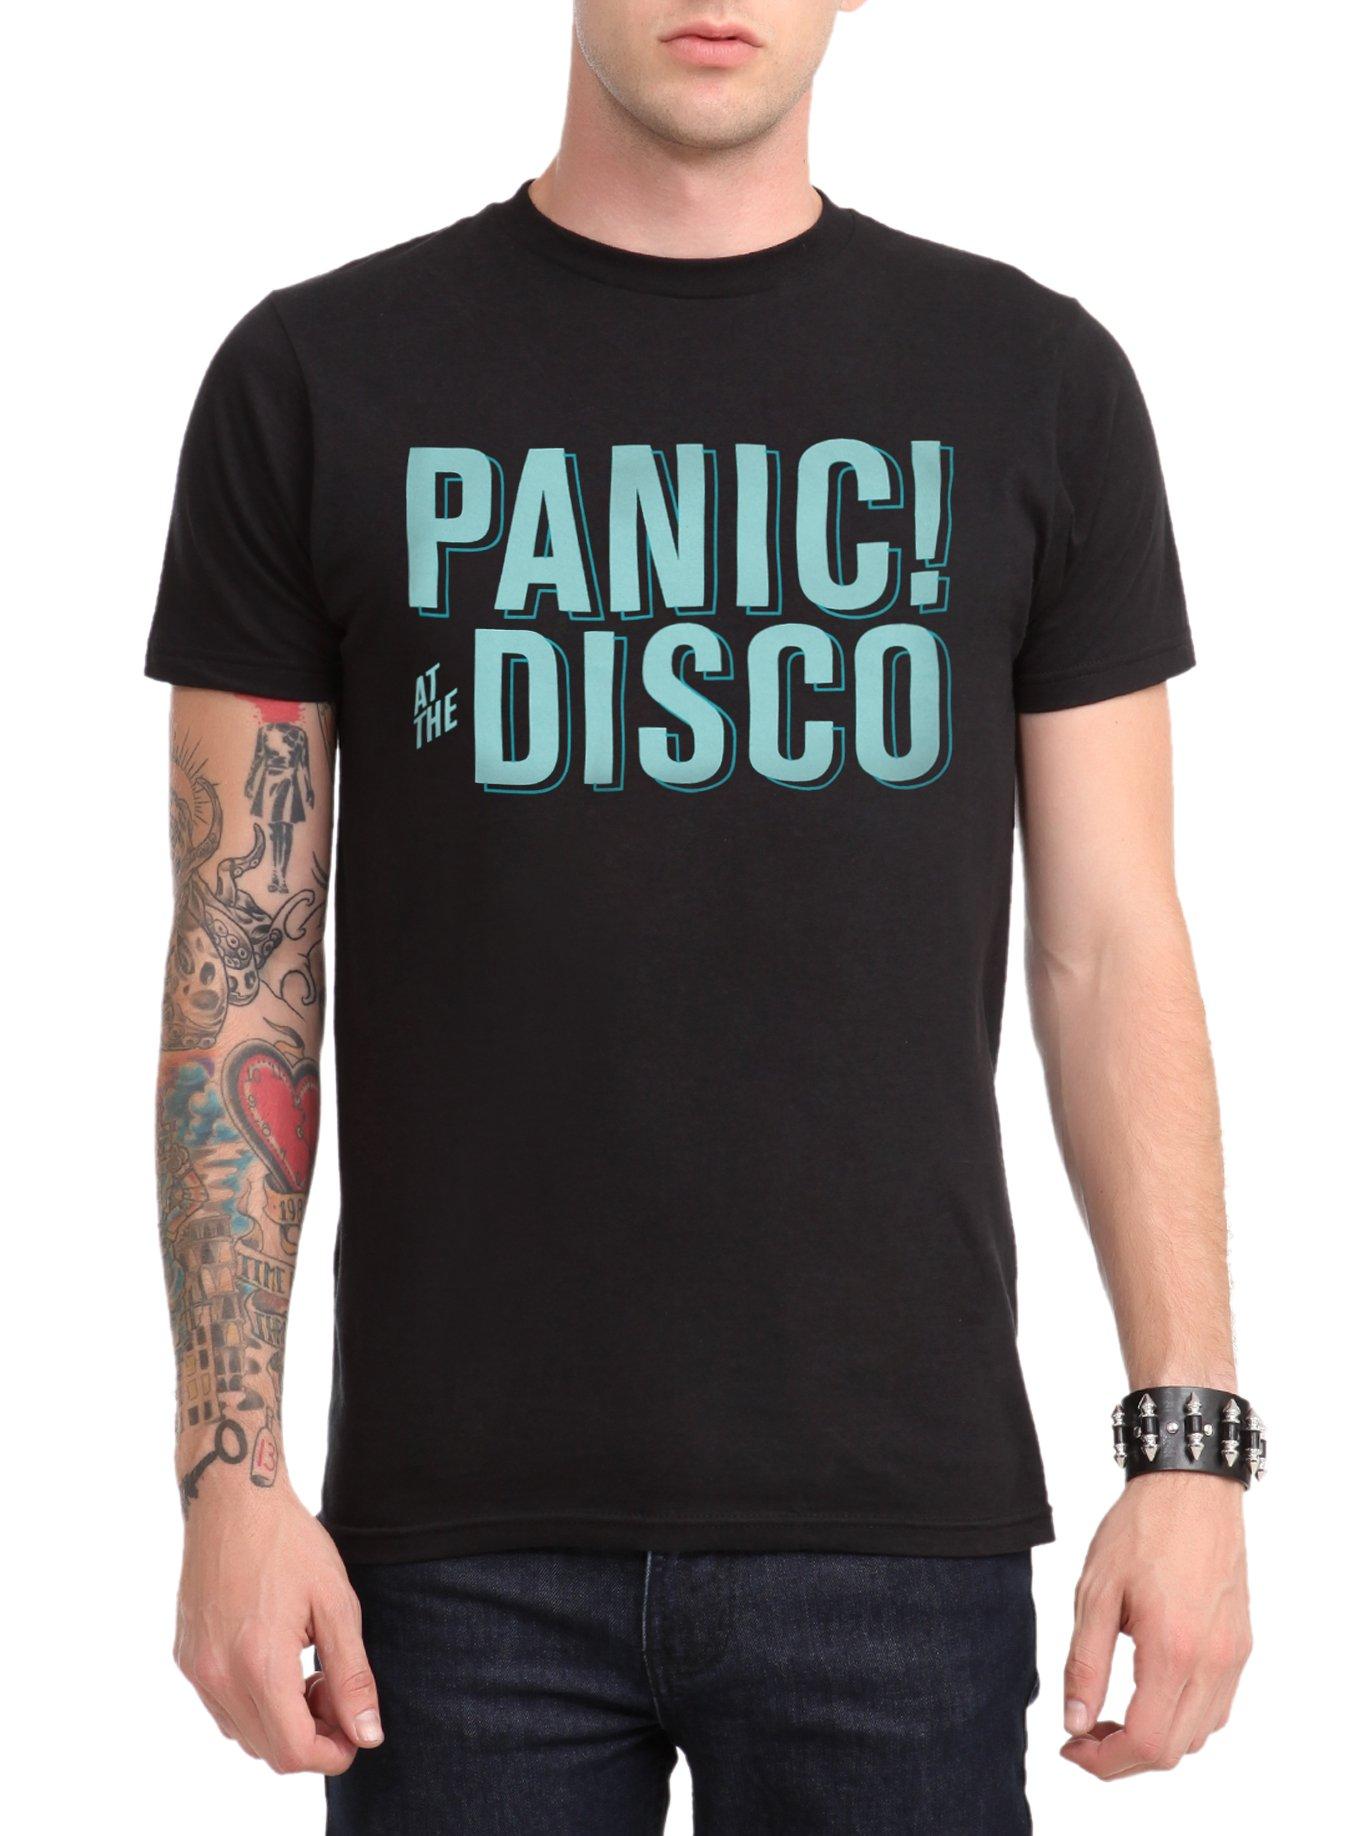 Panic! At The Disco Turquoise Logo T-Shirt | Hot Topic